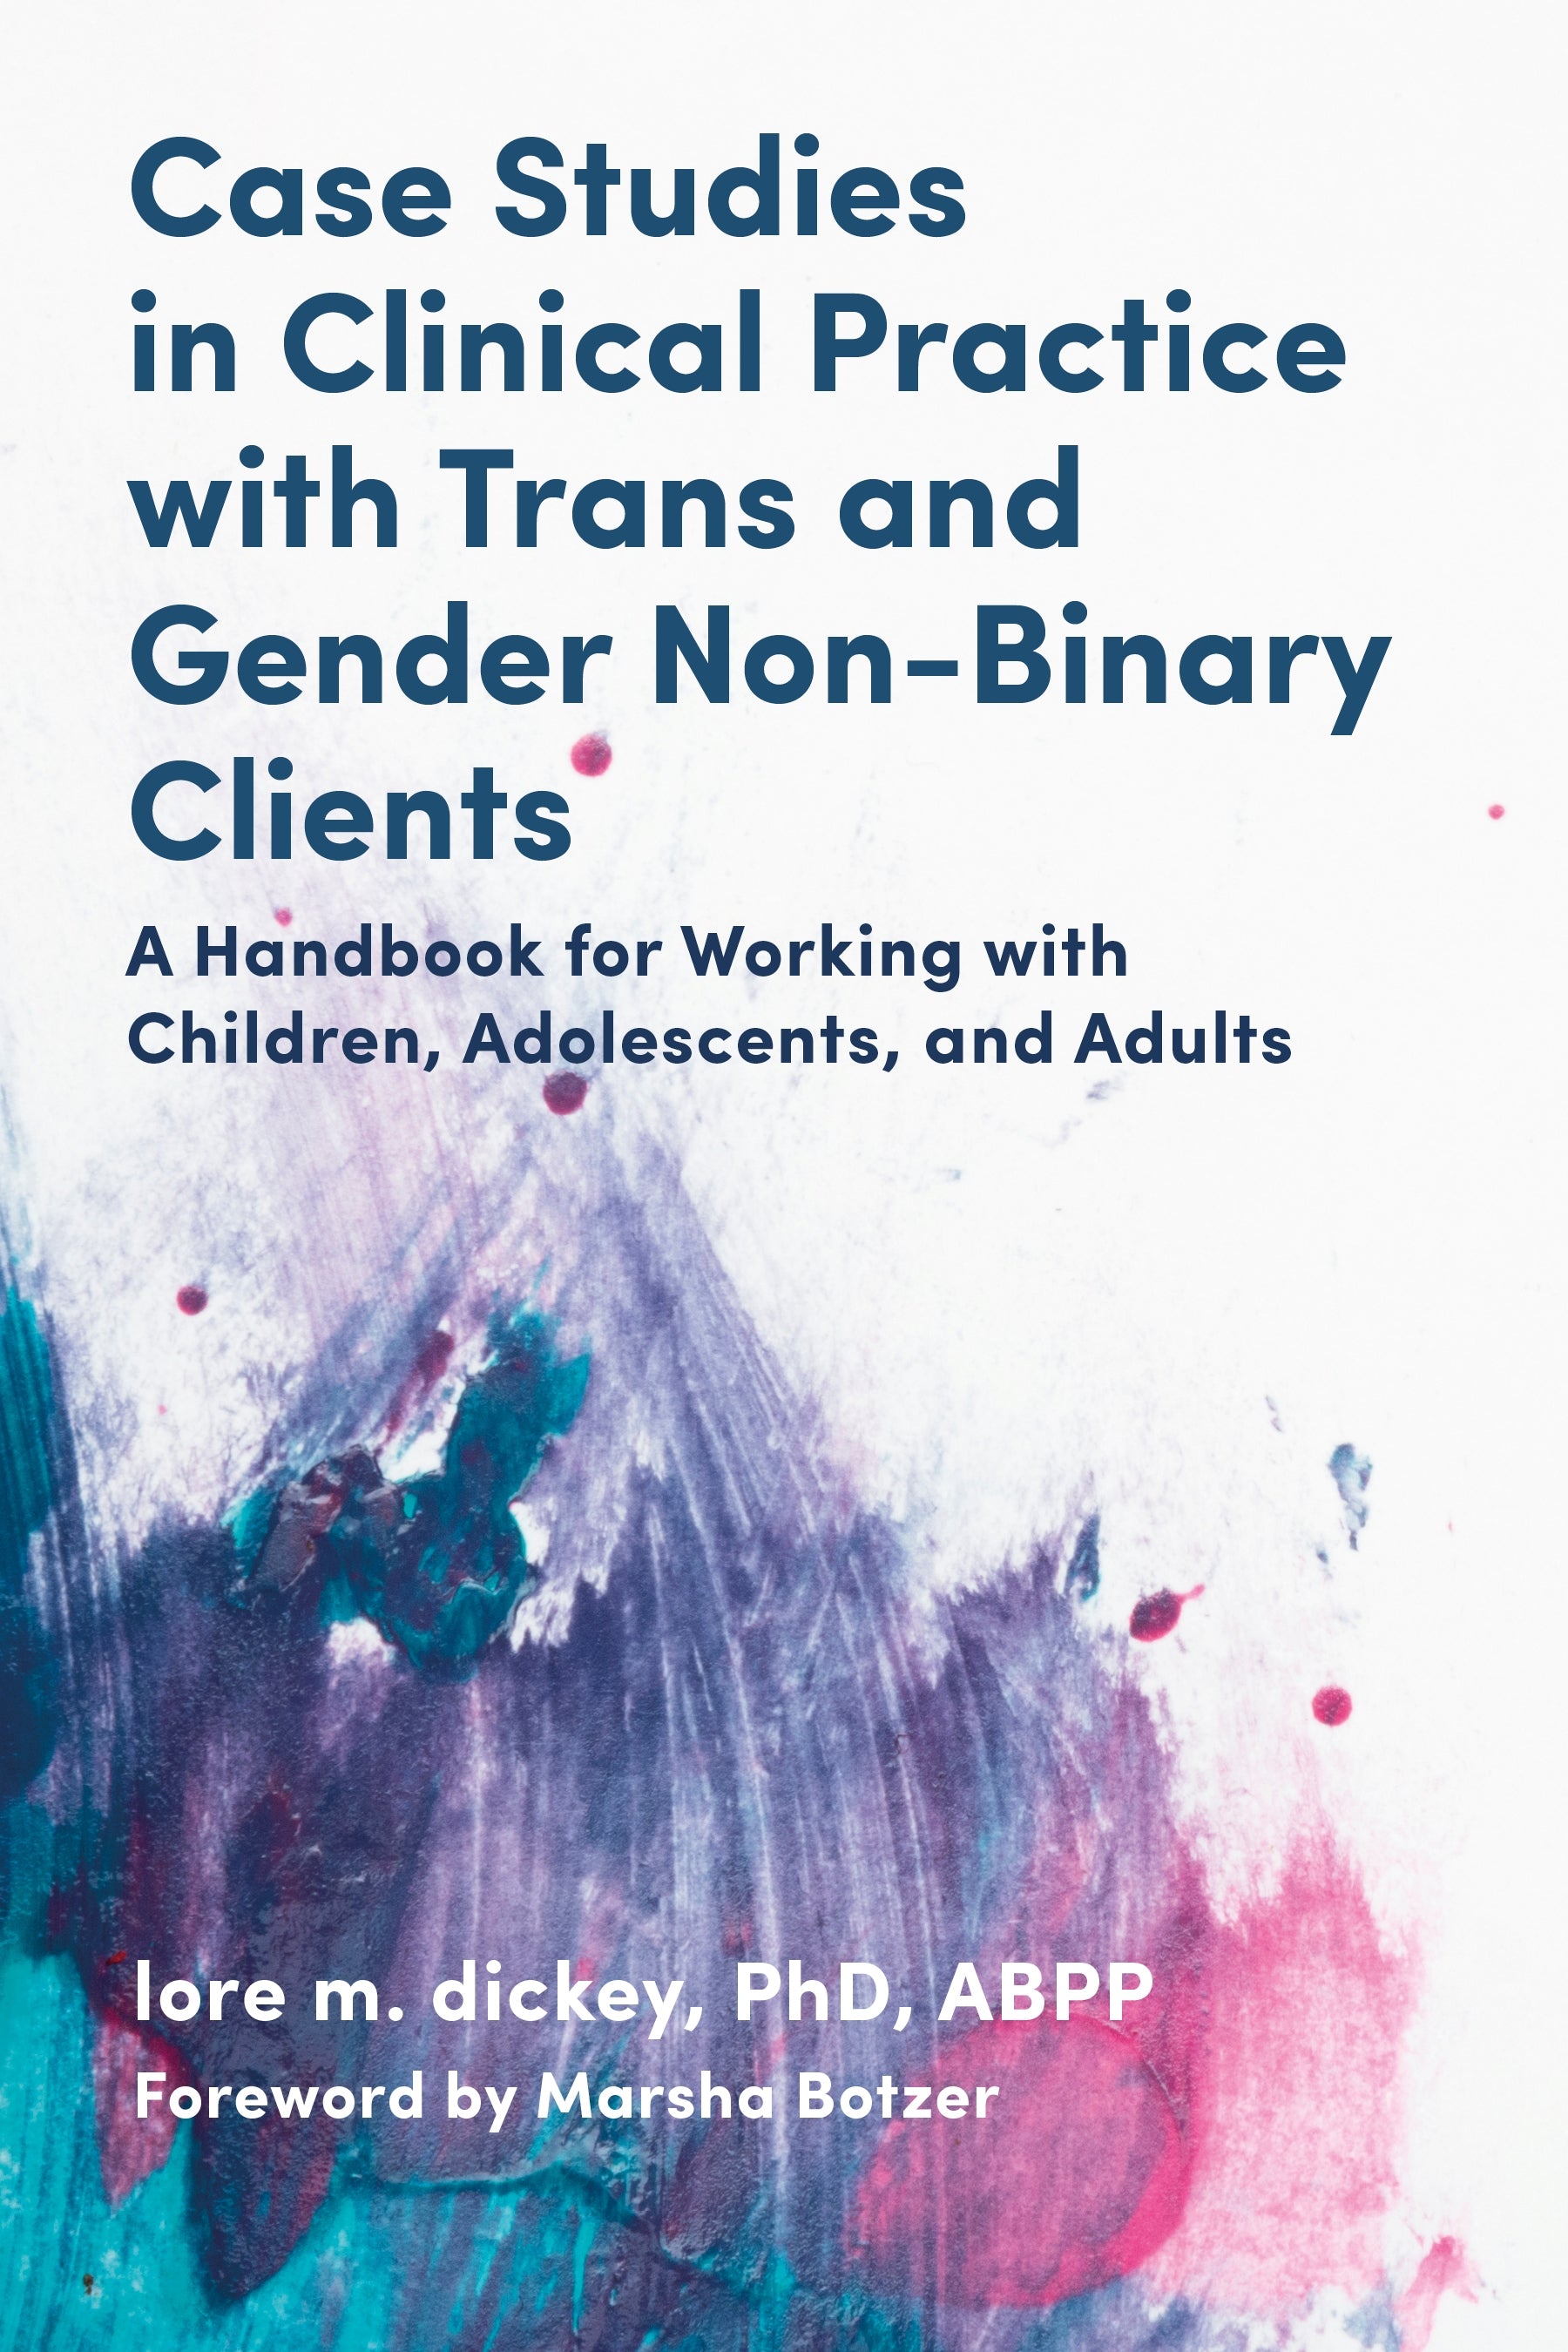 Case Studies in Clinical Practice with Trans and Gender Non-Binary Clients by Marsha Botzer, lore m. dickey